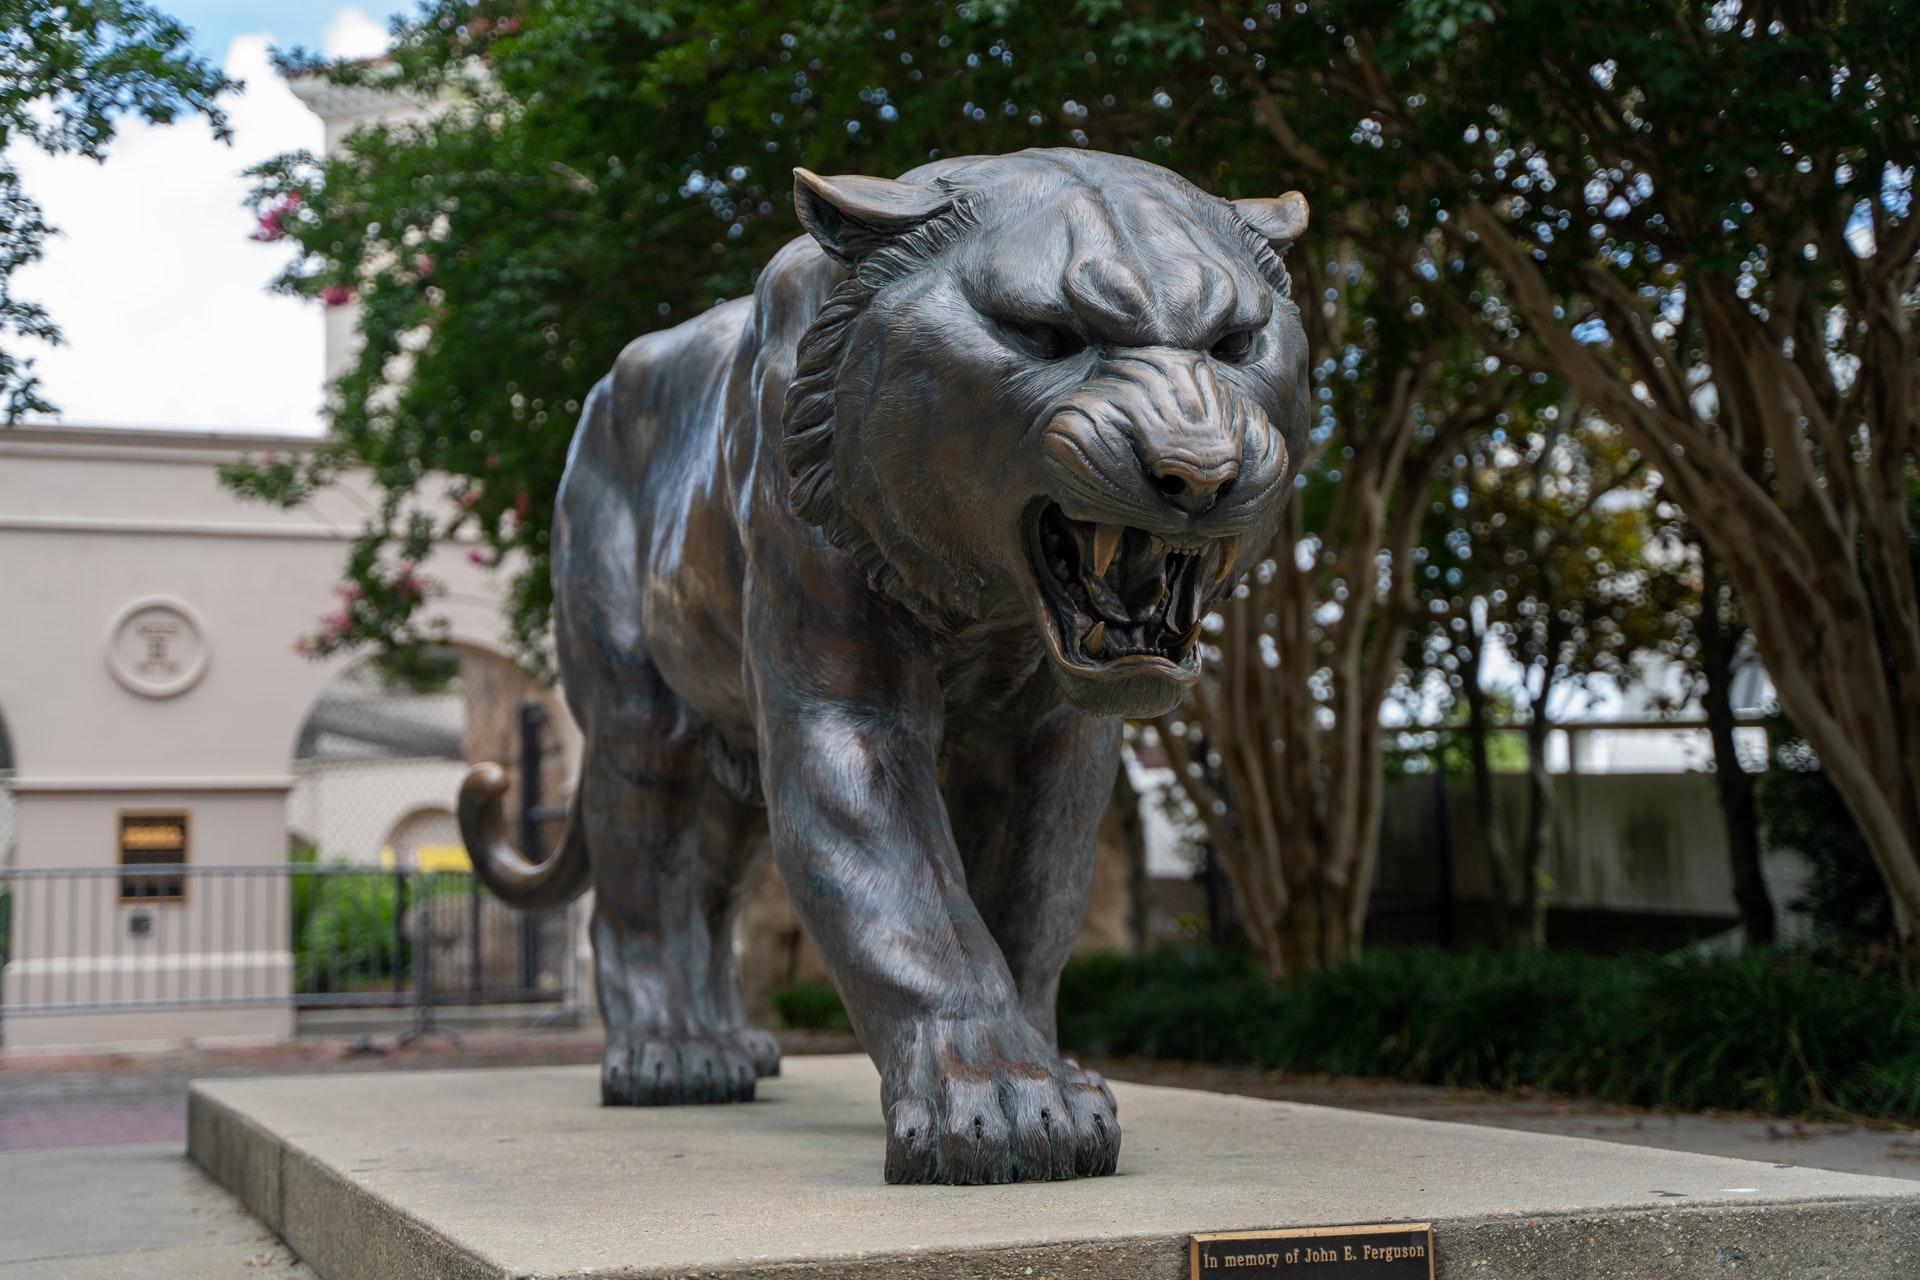 LSU's mascot in statue form at Baton Rouge